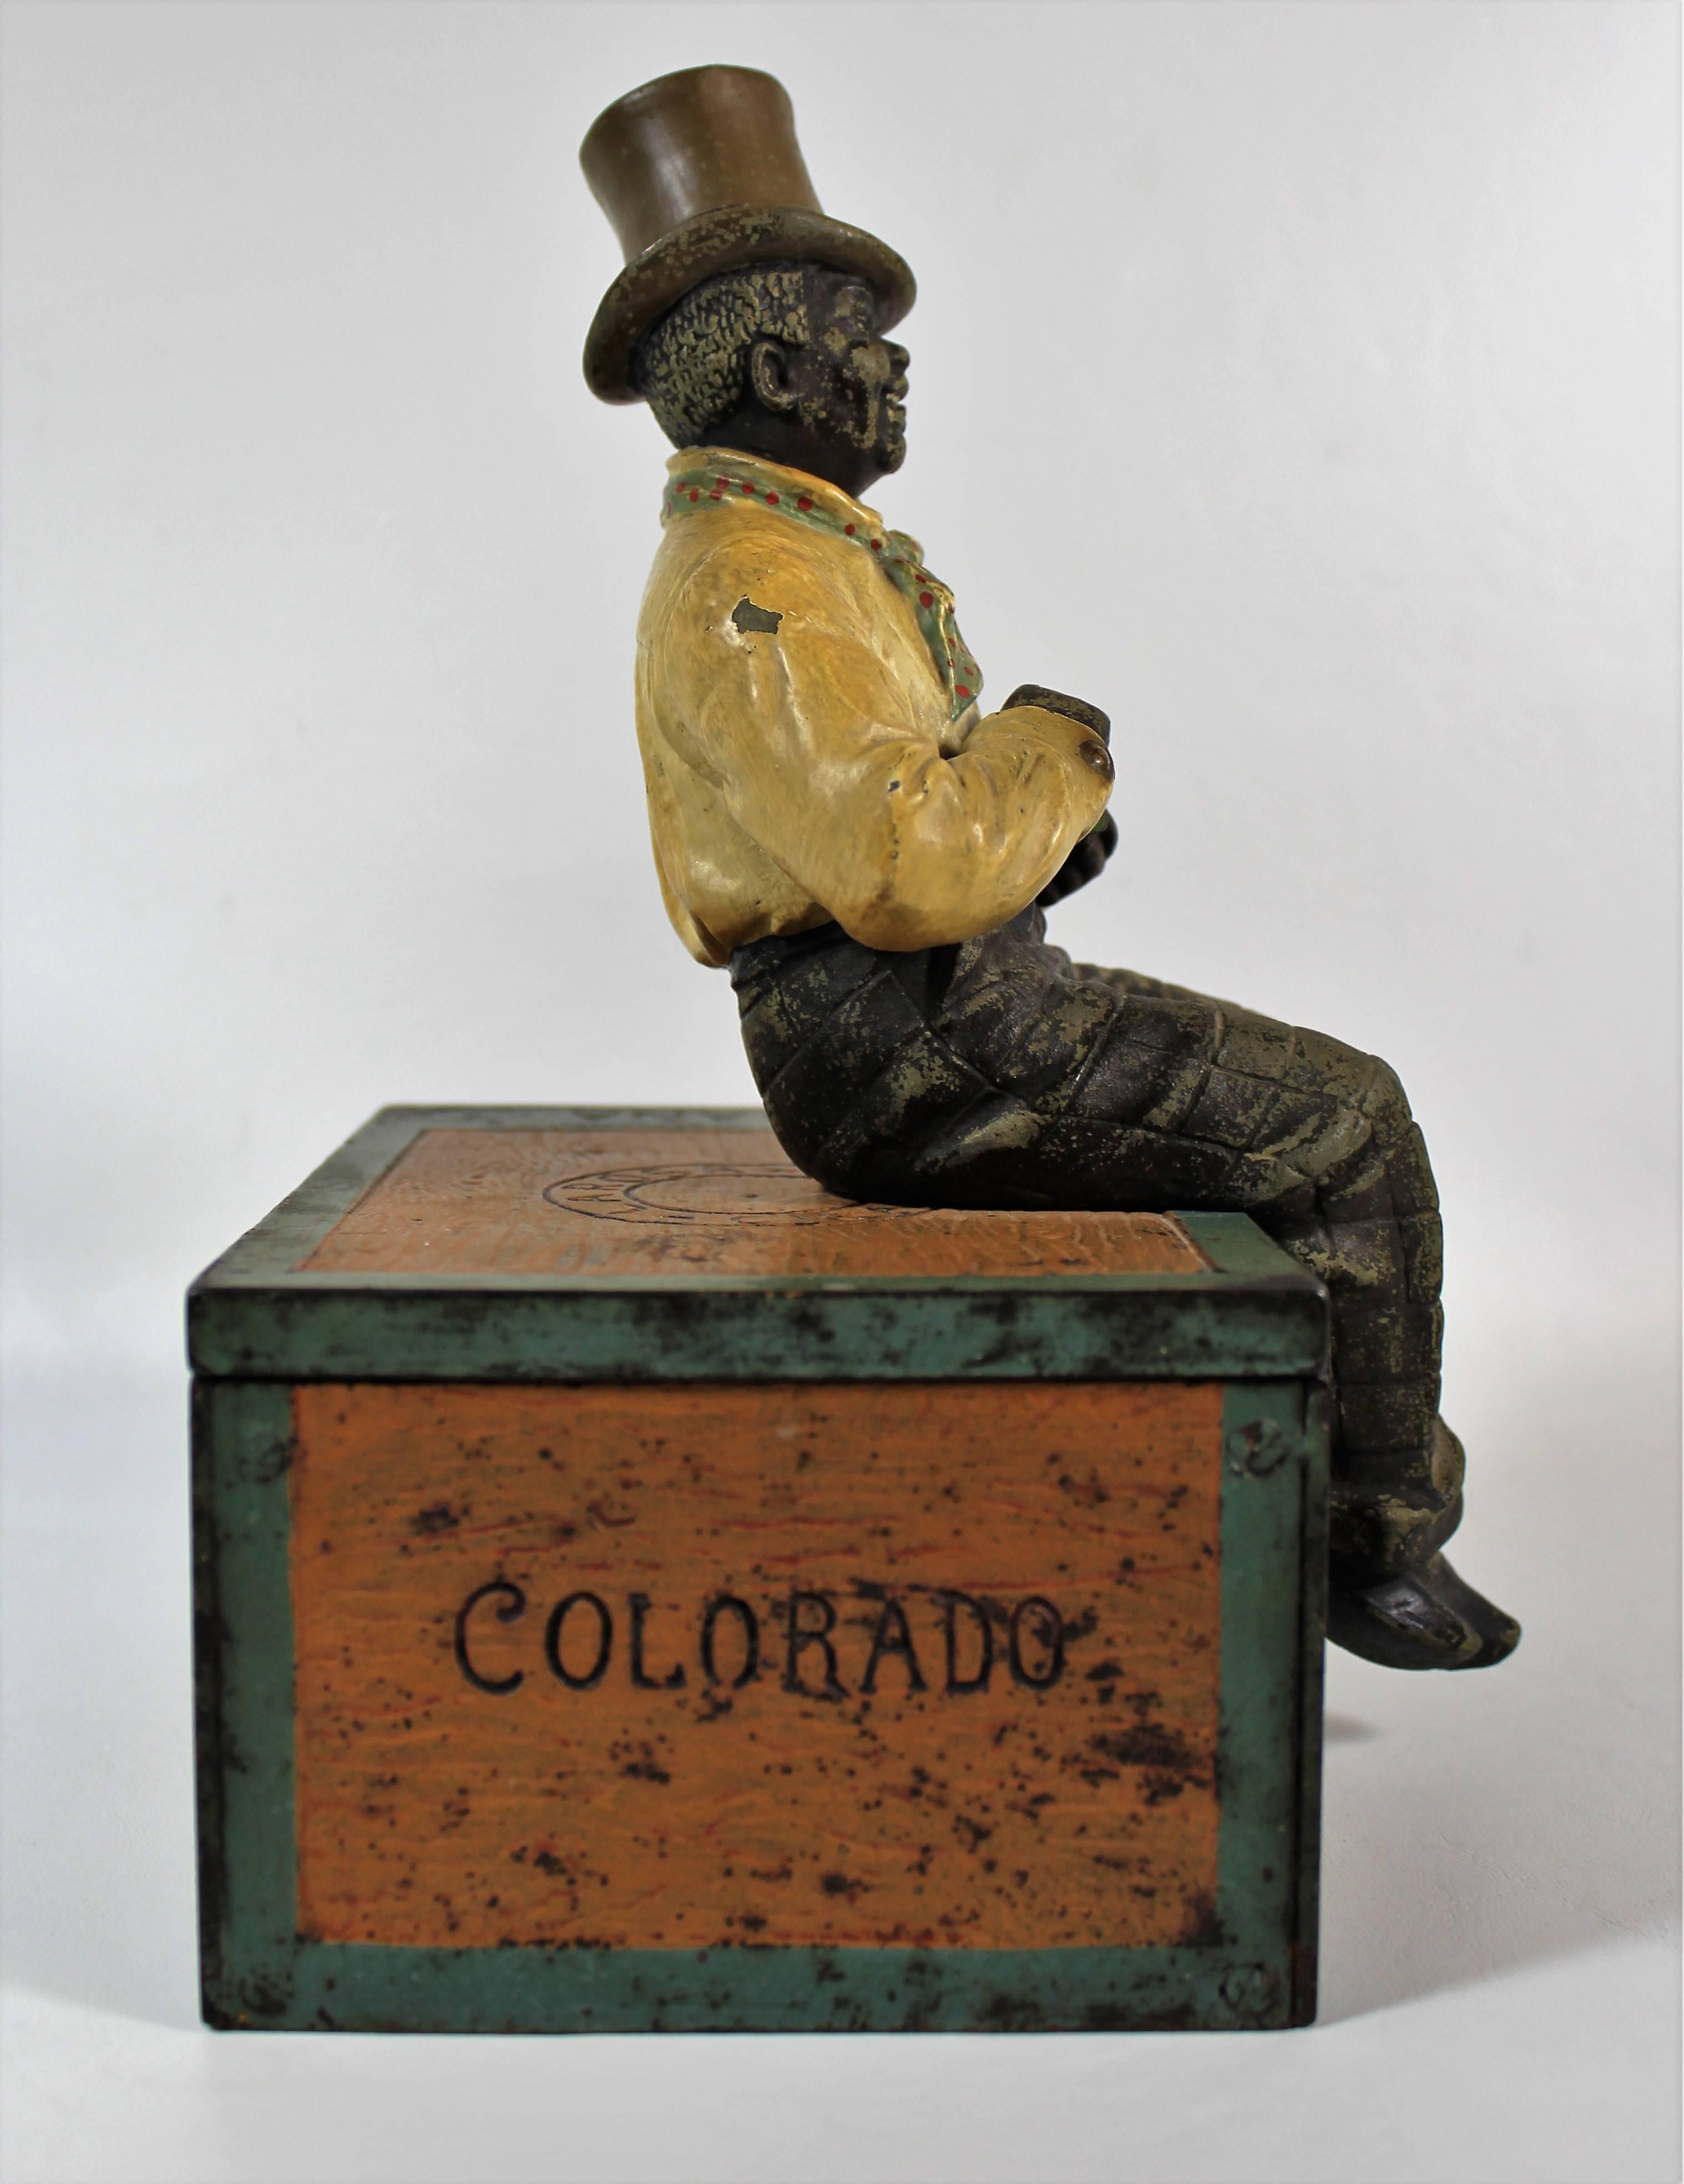 Black Memorabilia Cigar Box/Humidor. Whimsical cast iron humidor with a well dressed black man in a hat and scarf.